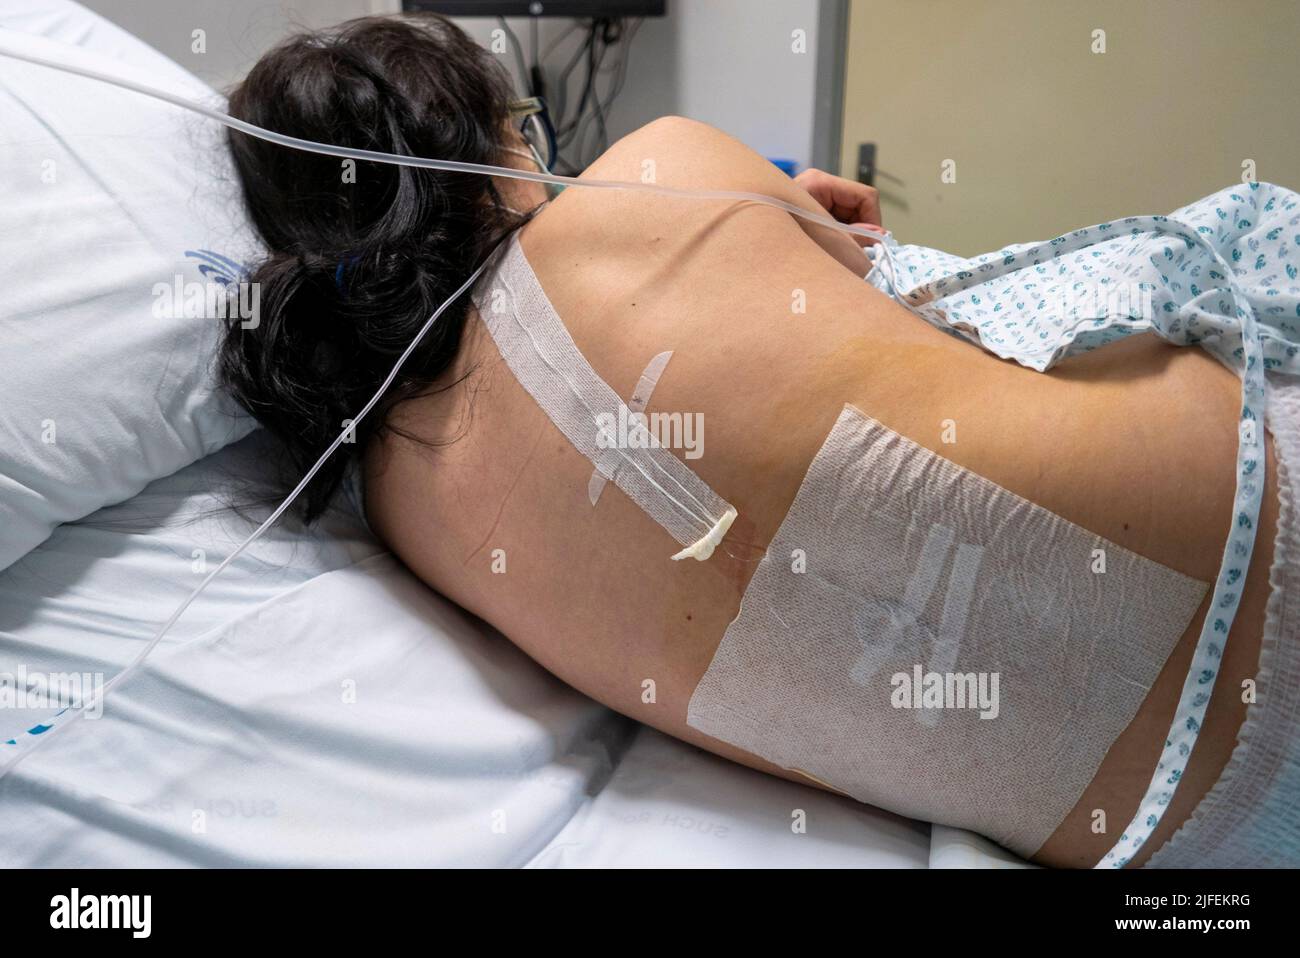 Pregnant woman with lumbar epidural catheter resulting from epidural administration in preparation for labour Stock Photo